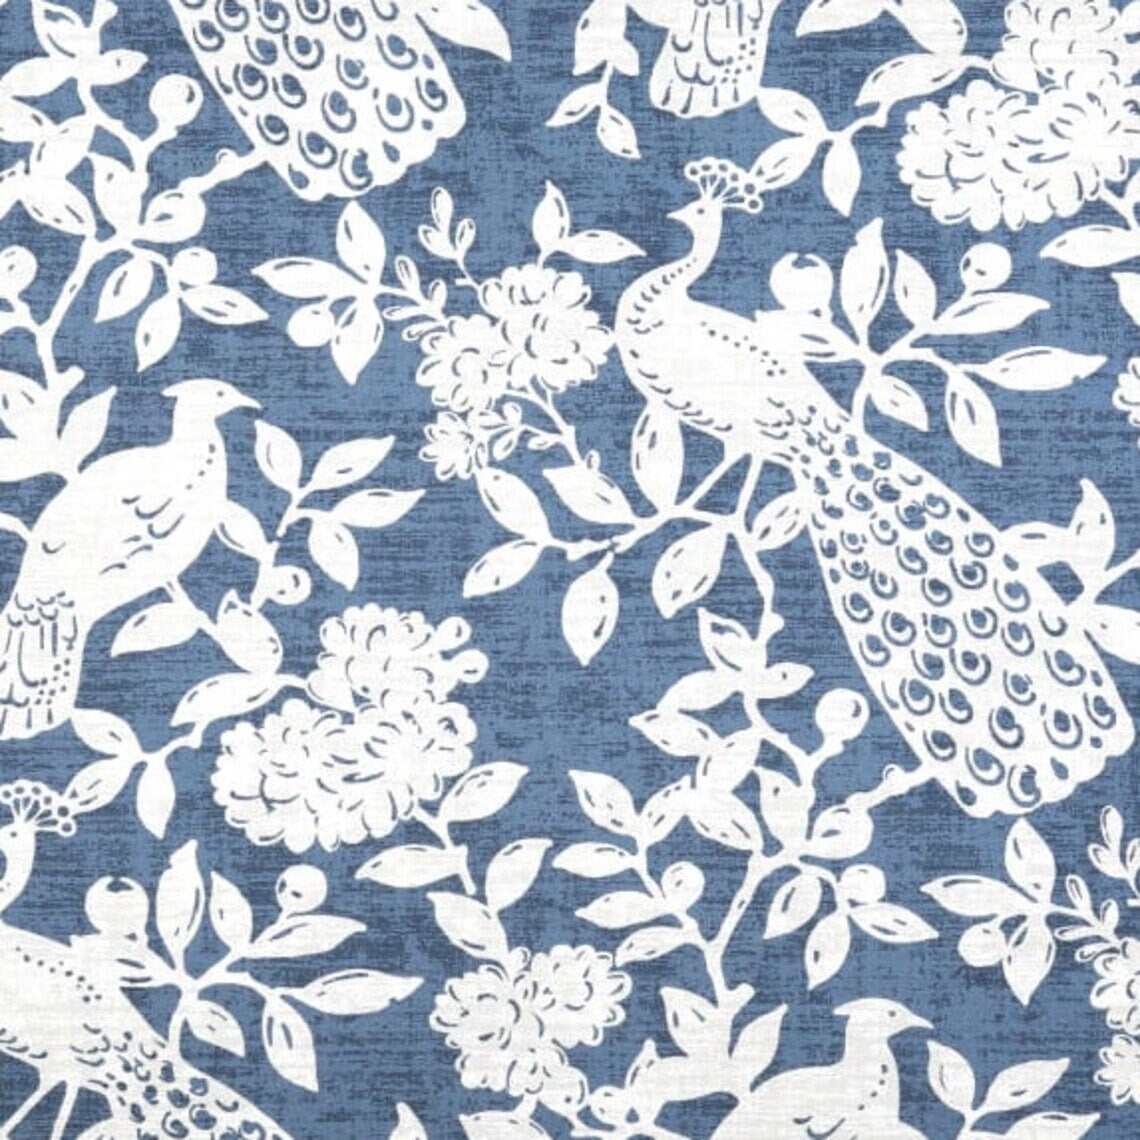 duvet cover in birdsong navy blue bird toile, large scale